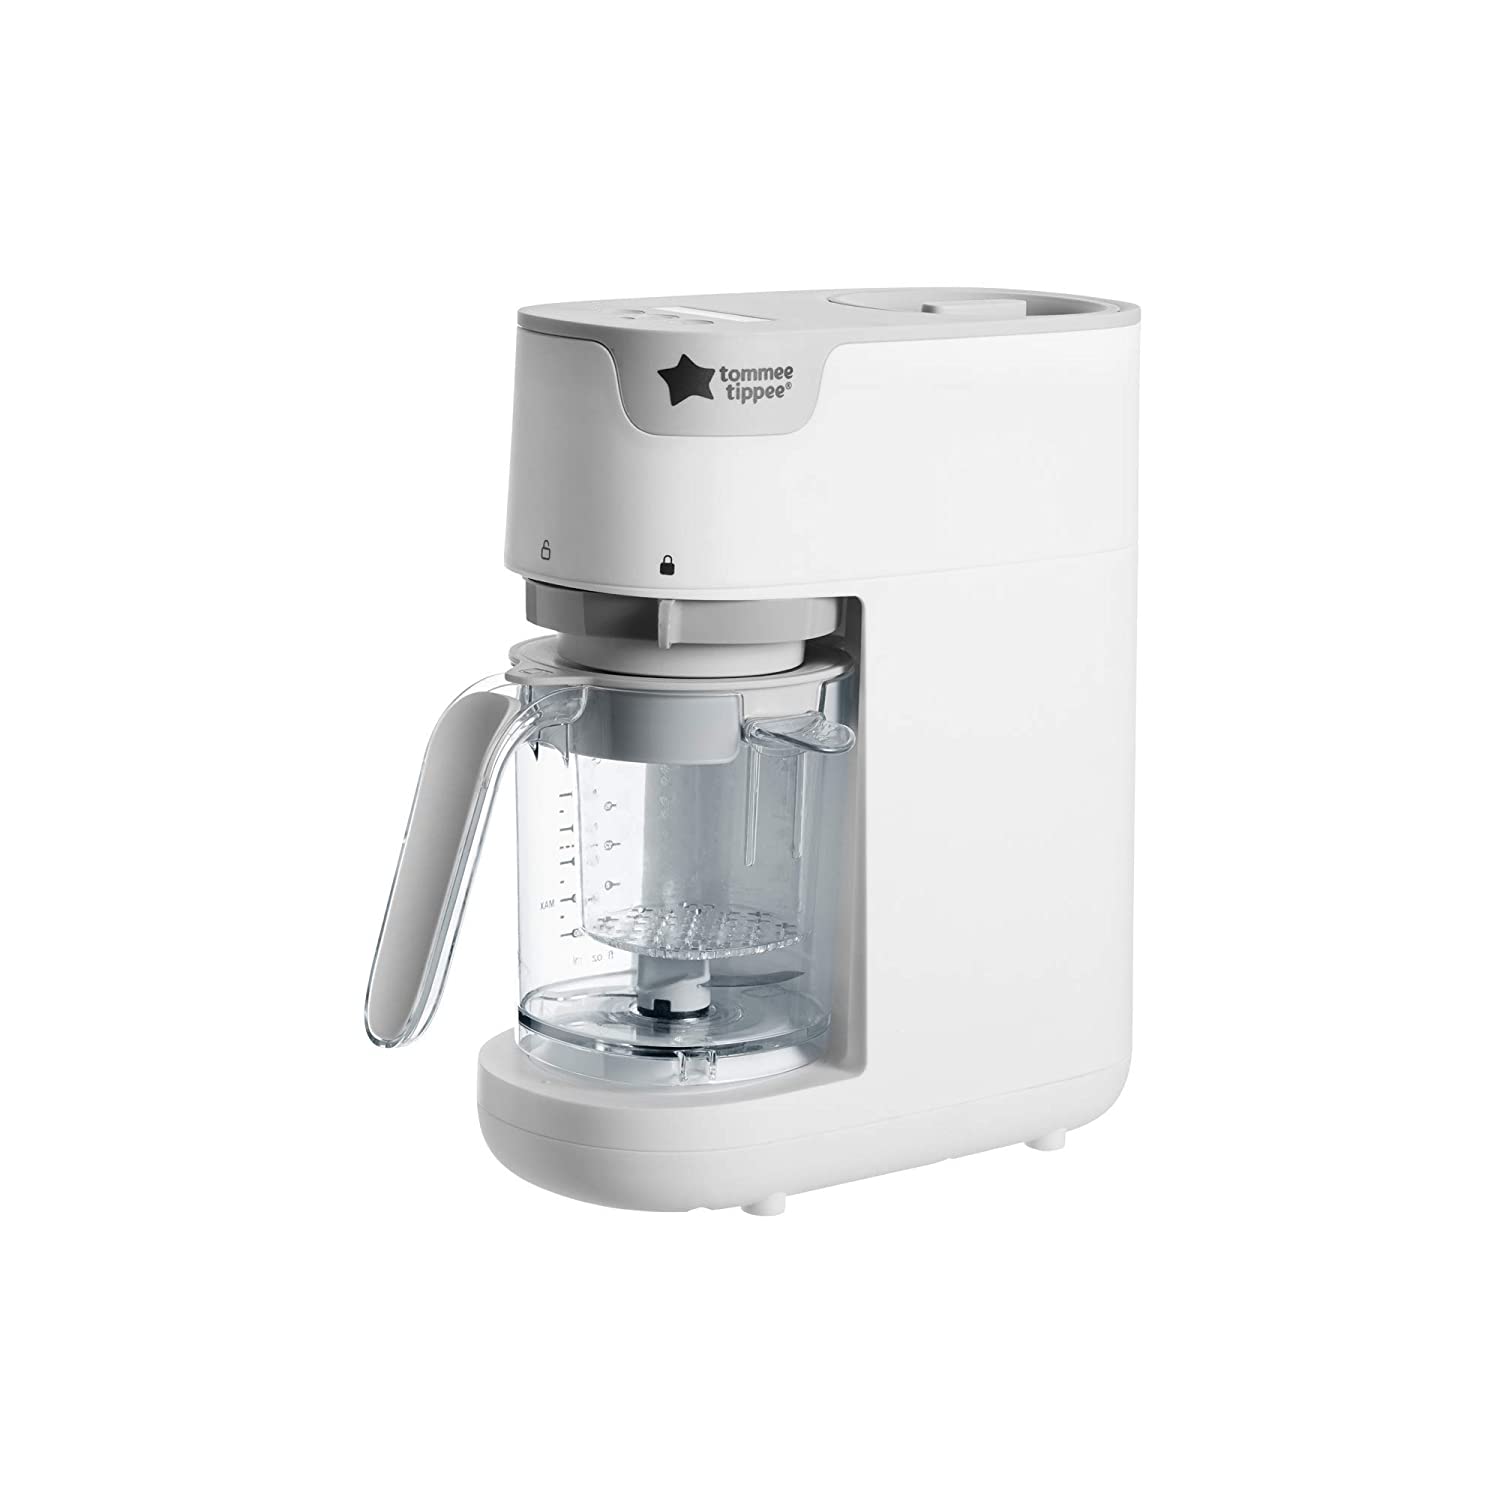 Tommee Tippee Quick Cook Baby Food Maker - Steaming and Mixing - Suitable for all Weaning Stages - White